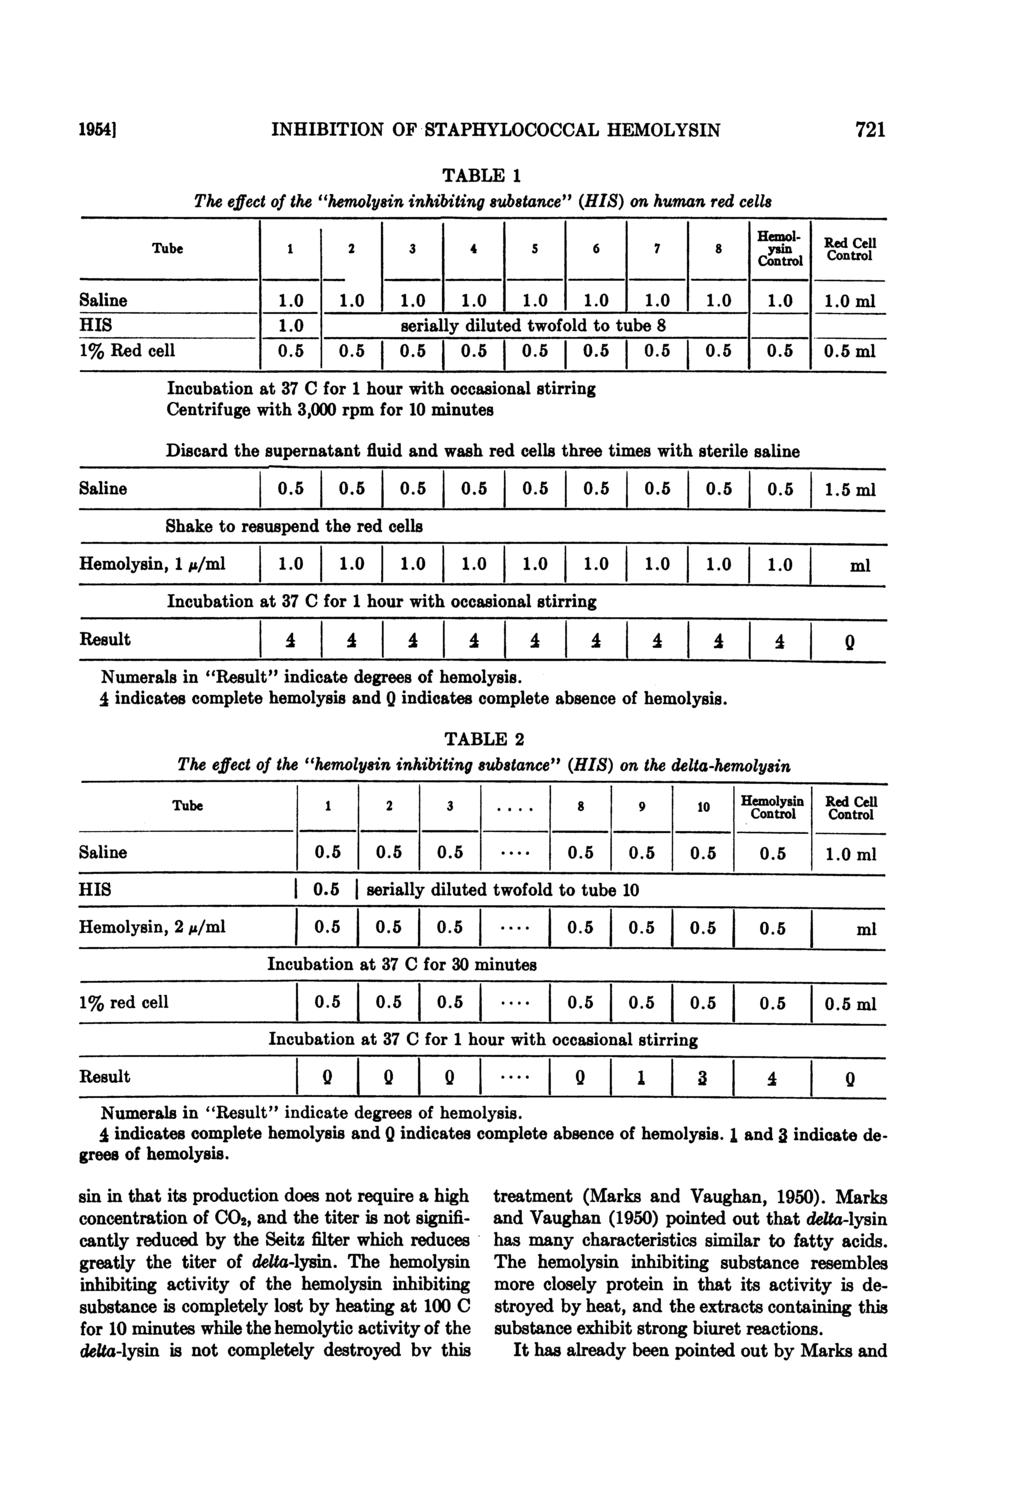 19541 INHIBITION OF STAPHYLOCOCCAL HEMOLYSIN 721 TABLE 1 The effect of the "hemolysin inhibiting substance" (HIS) on human red cells Tube 1 2 3 4 6 7 l 8 Hemol- Red Cell dcl 06 5 0.